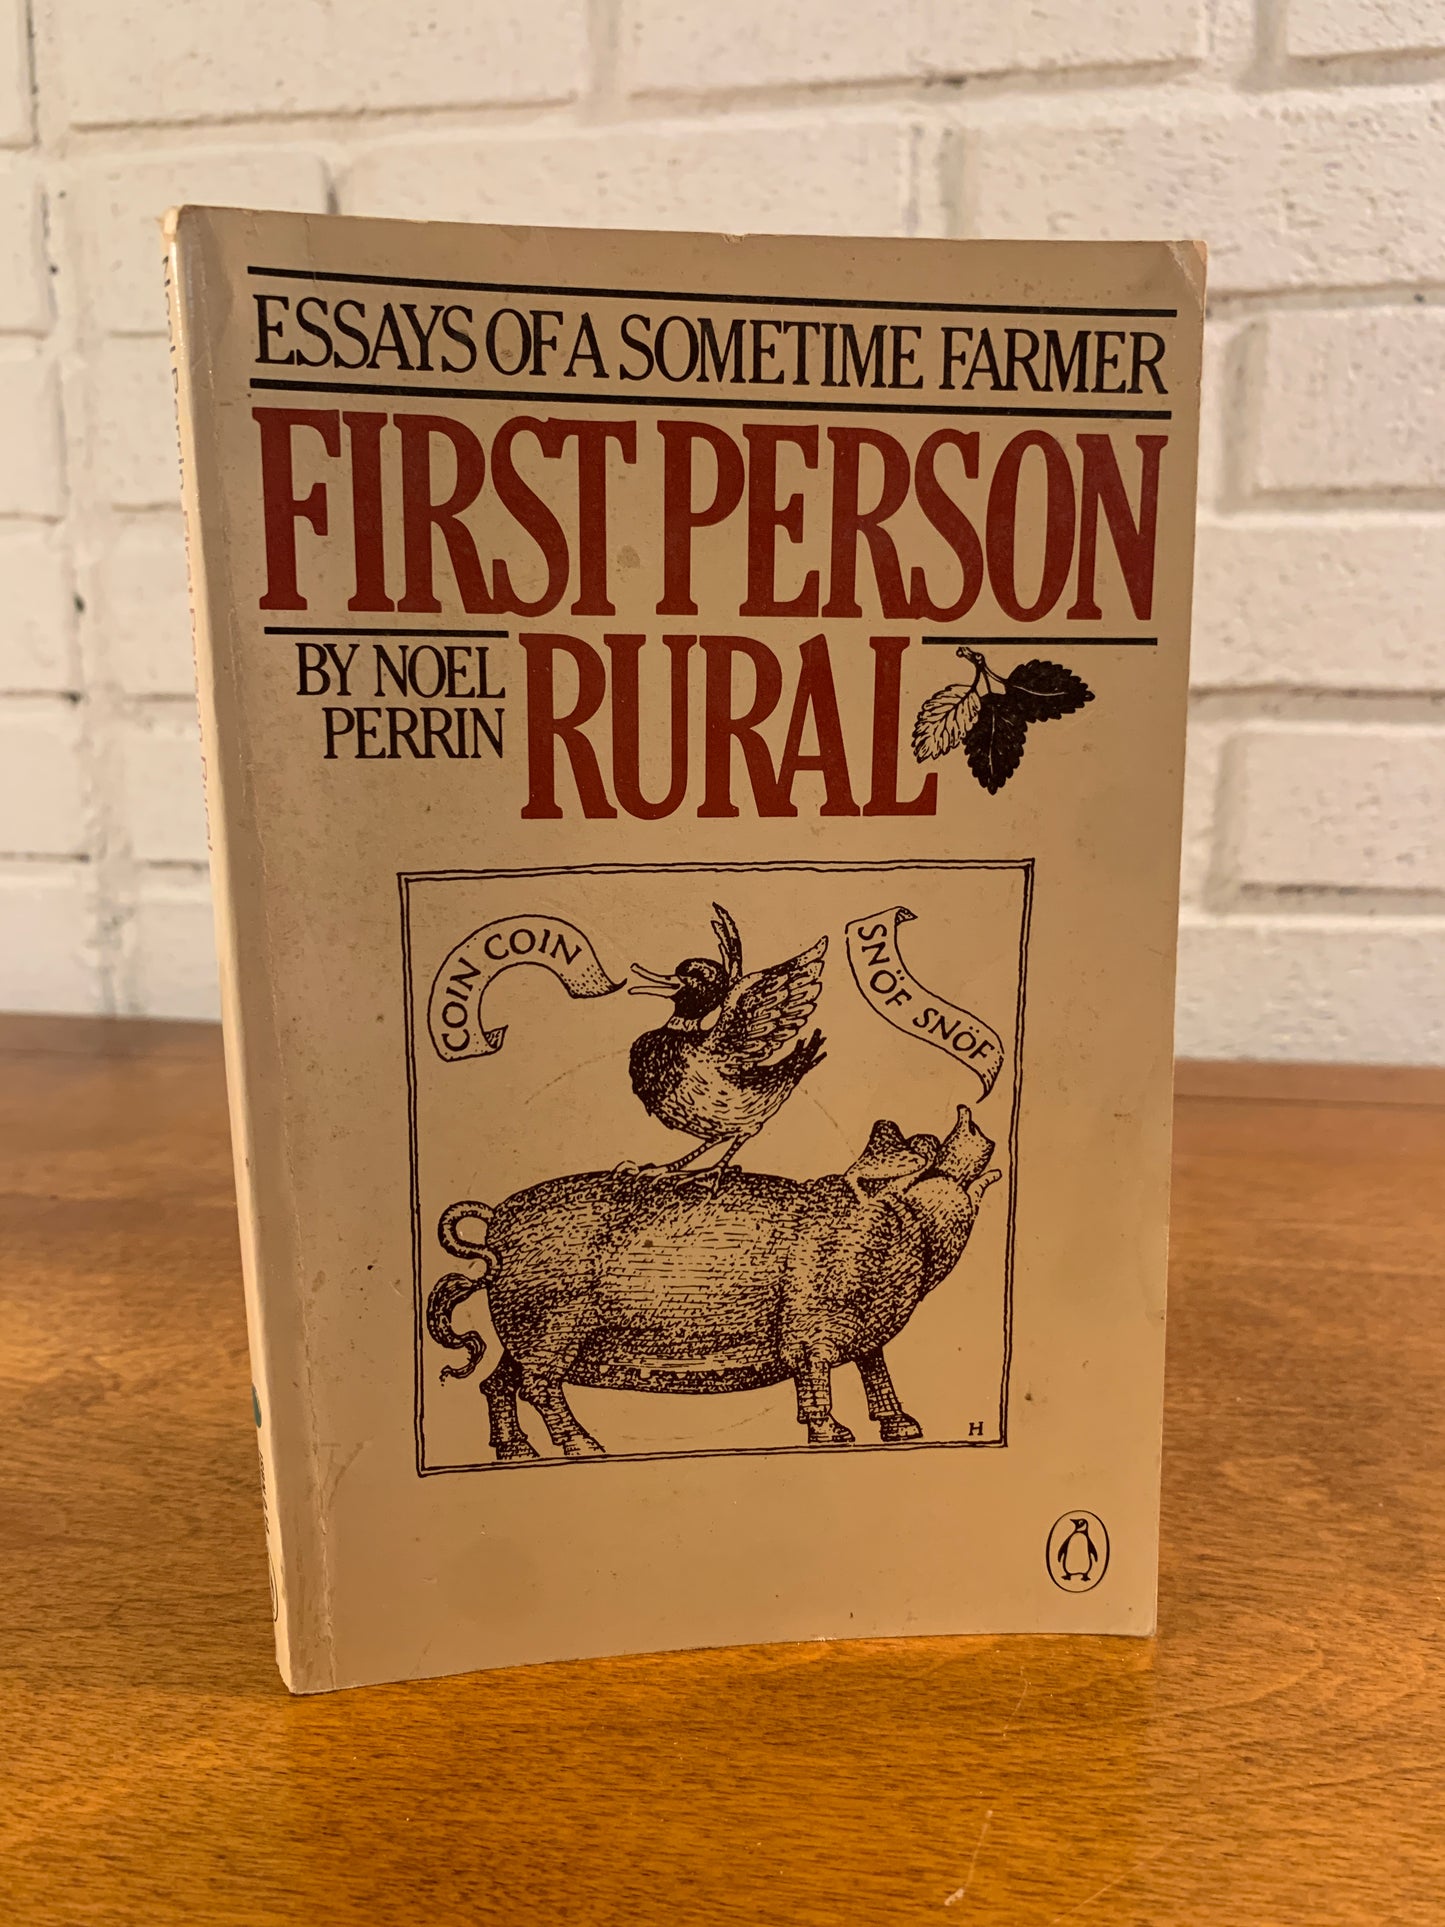 First Person Rural: Essays of a Sometime Farmer by Noel Perrin